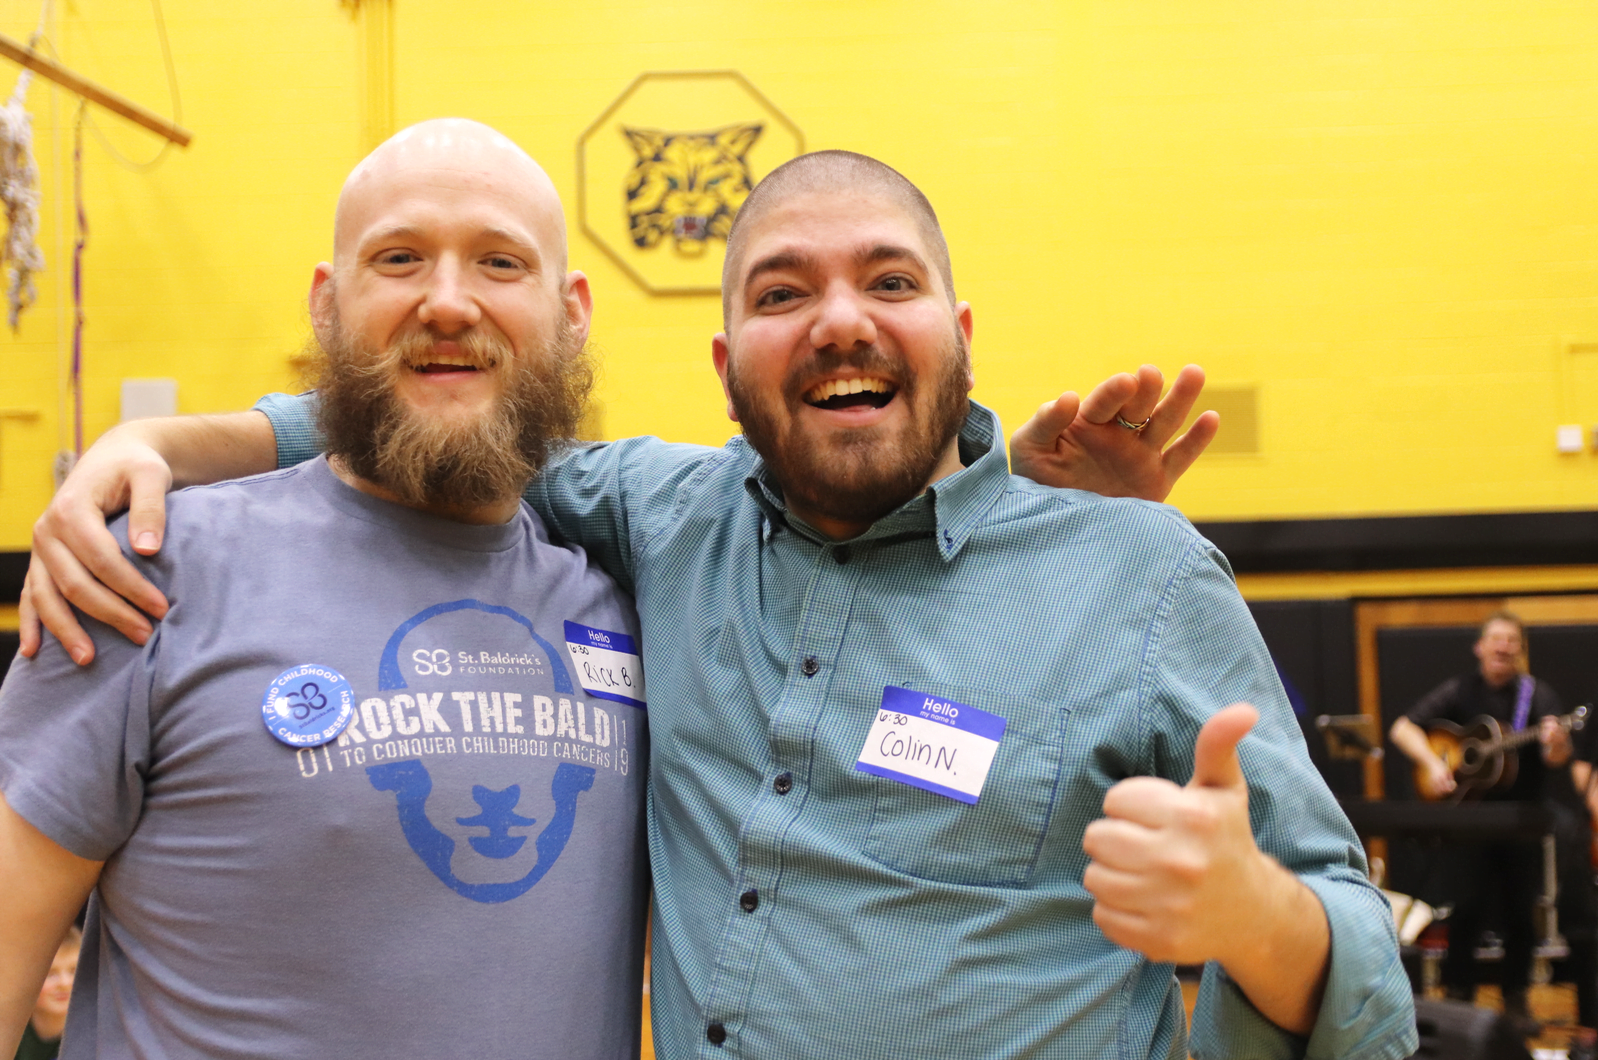 From GHS, Rick and Colin just after having their heads shaved. March 5, 2020 Photo: Leslie Yager